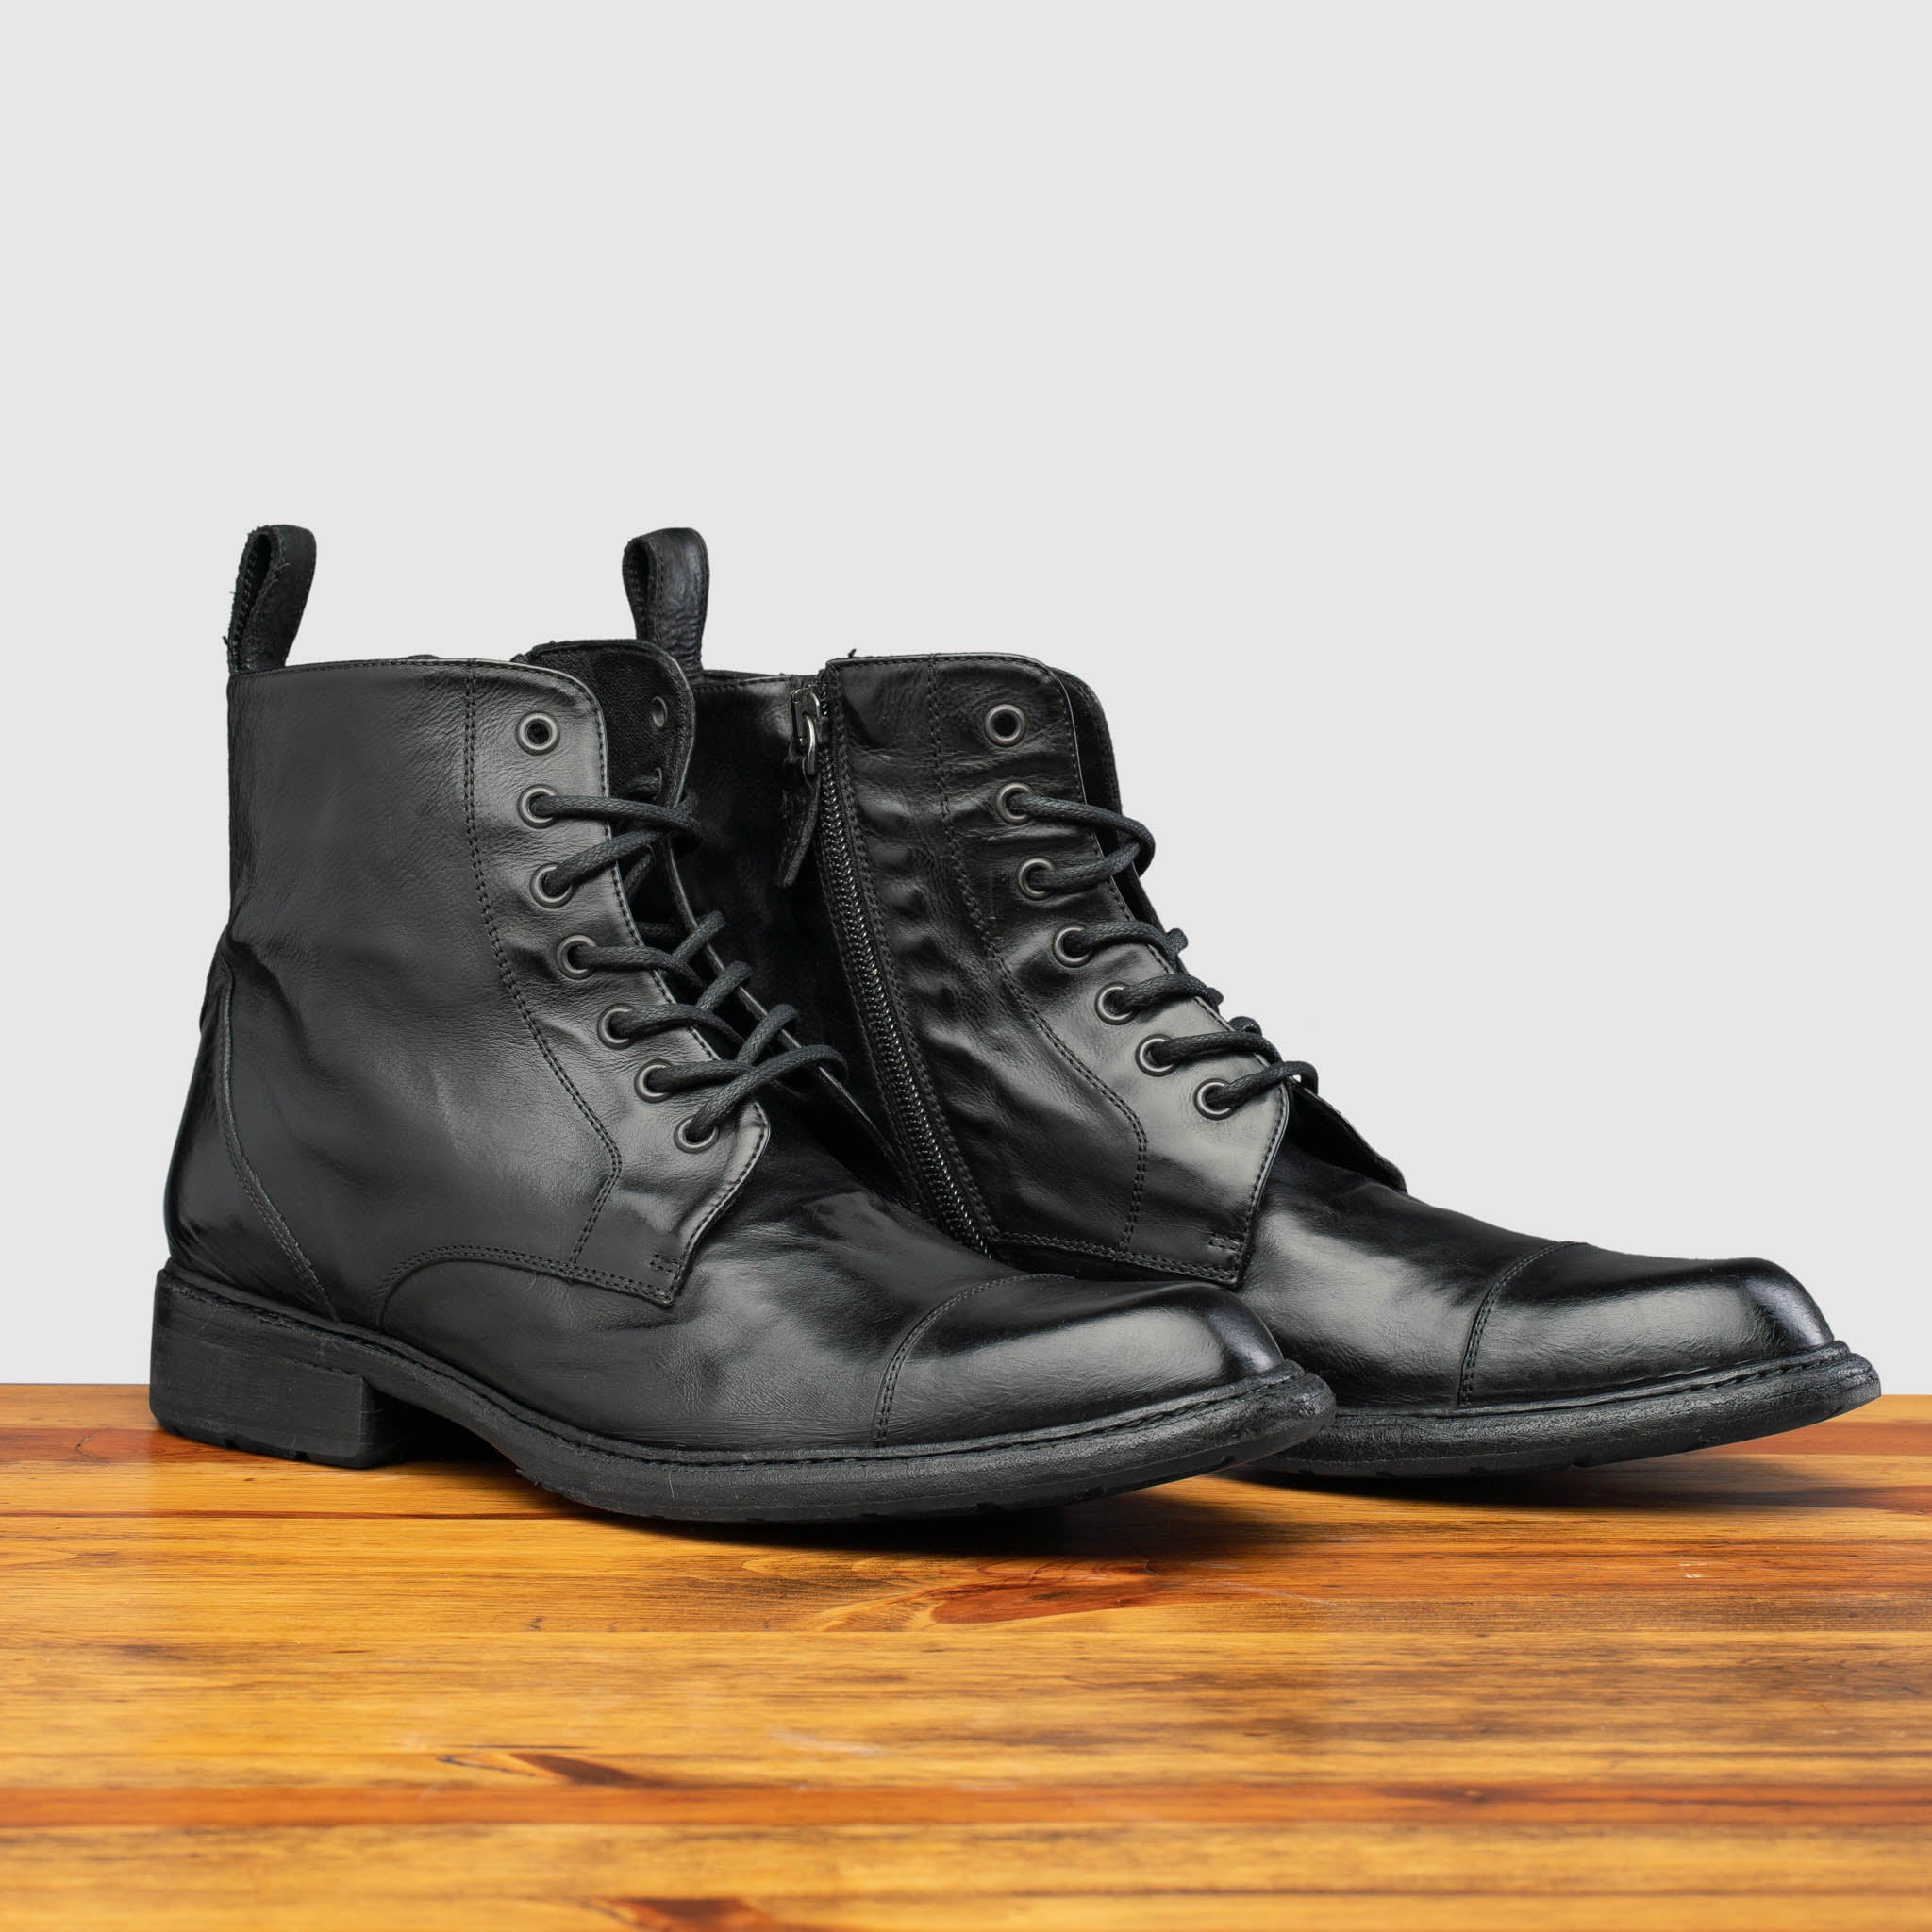 Pair of Q549 Calzoleria Toscana Black Combat Boot on top of a wooden table